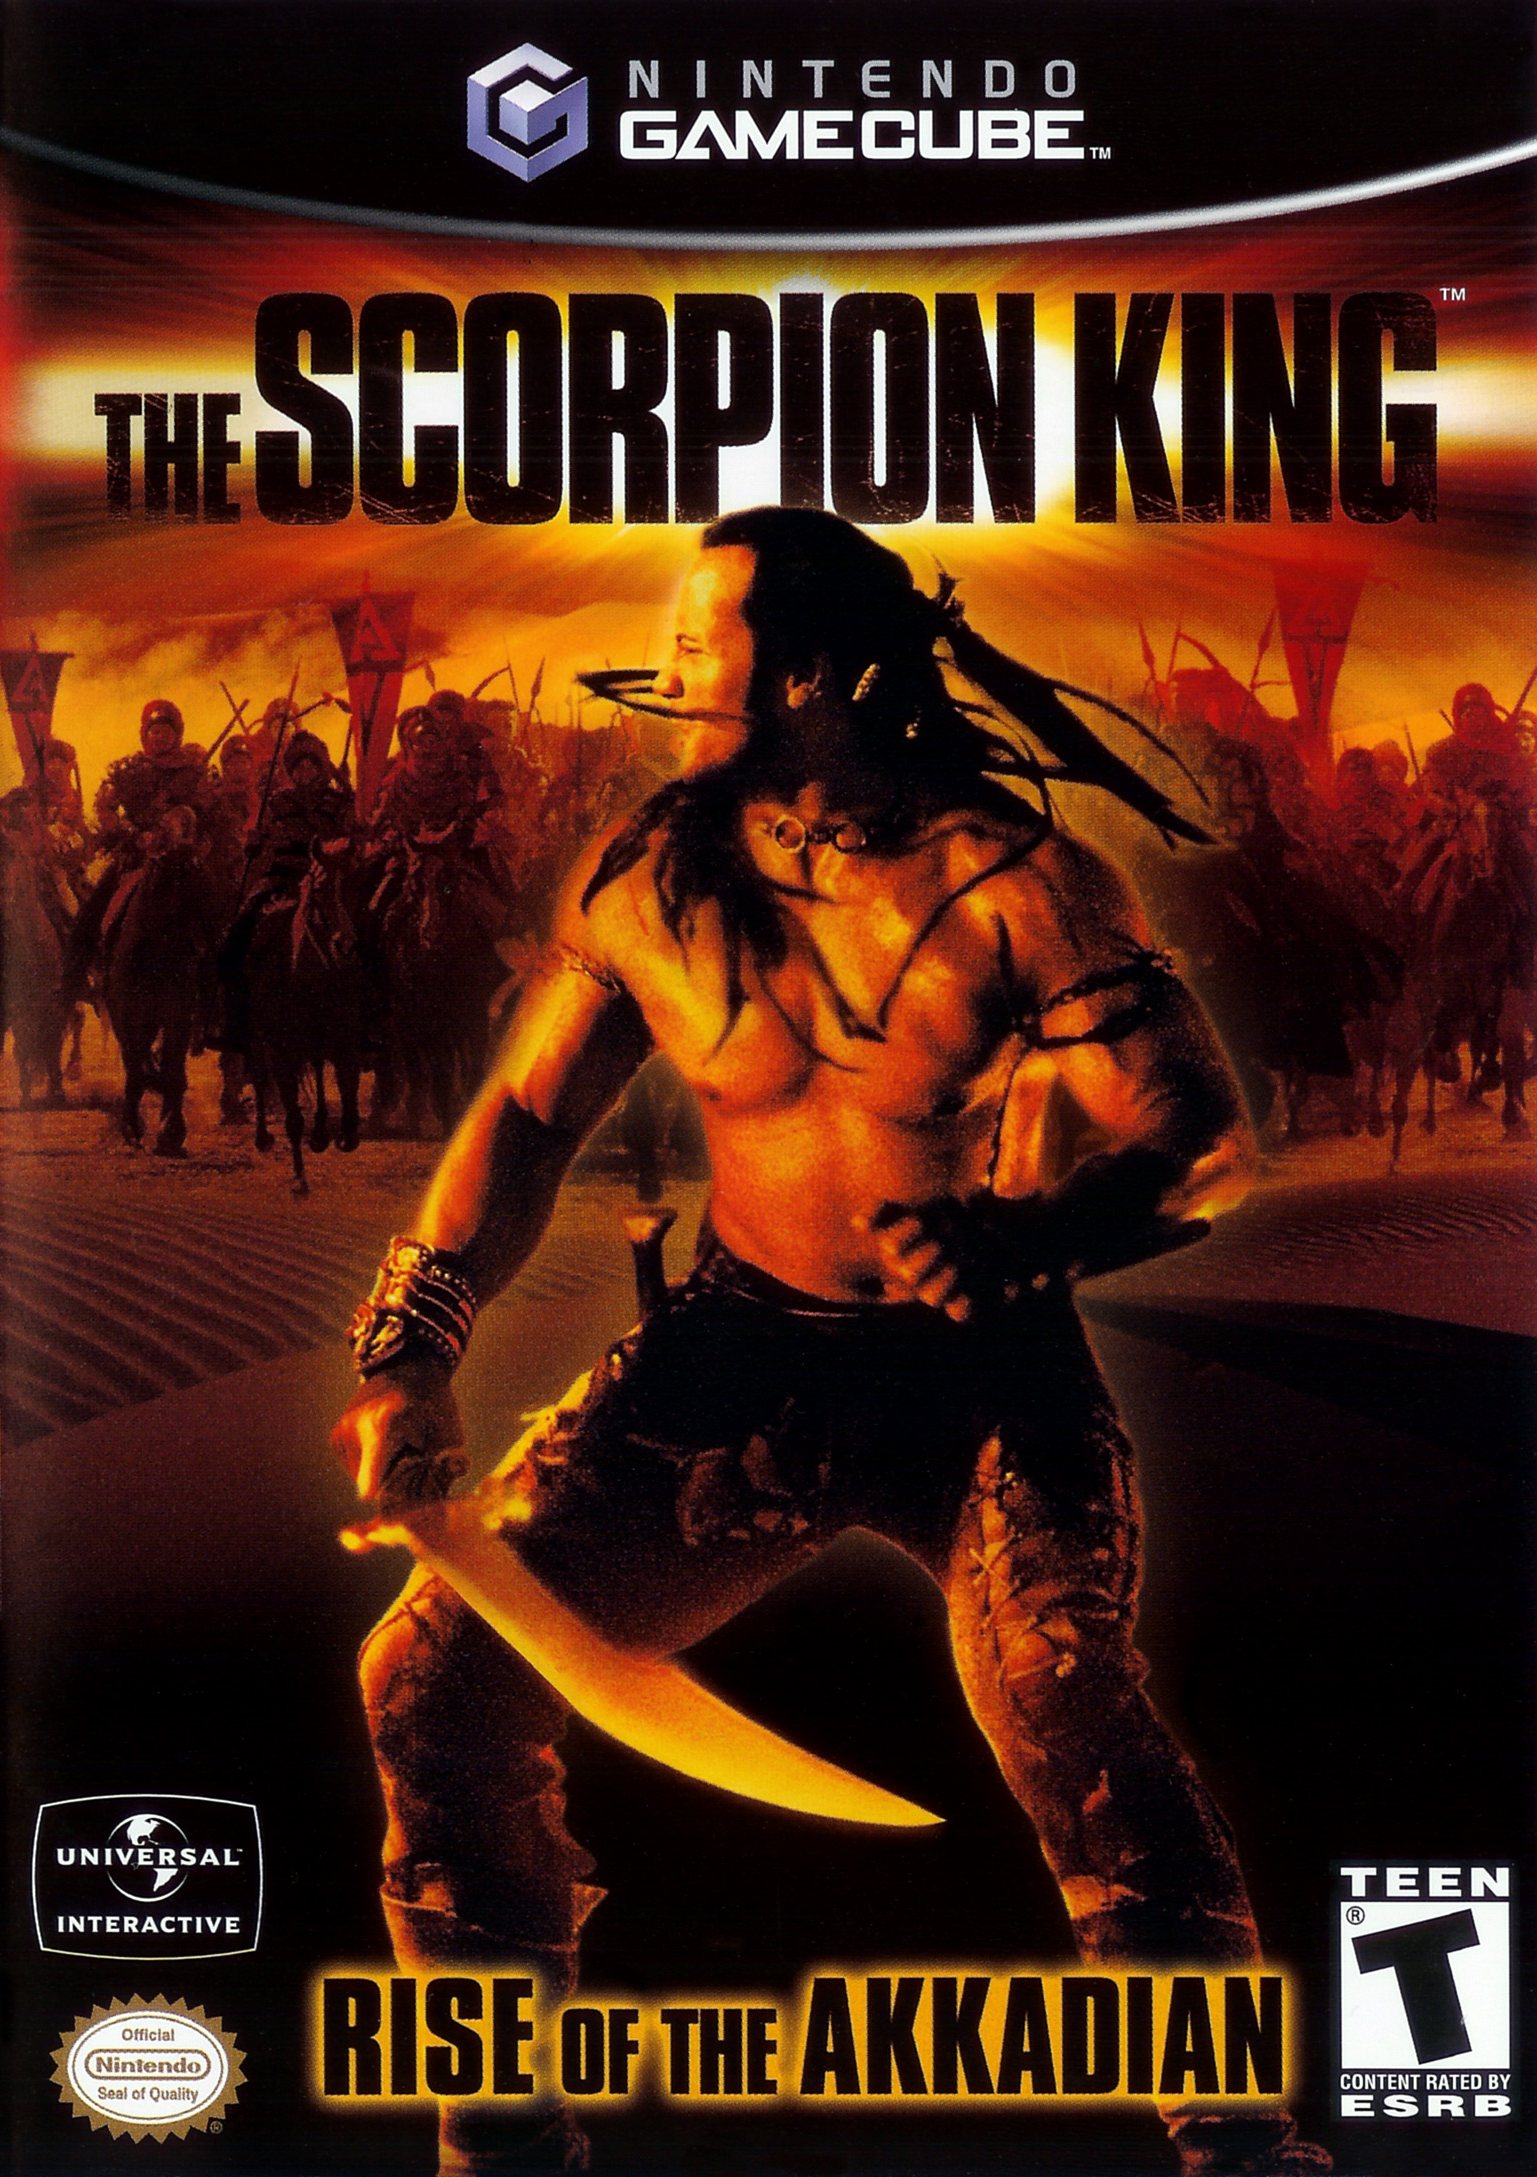 Amazing The Scorpion King Pictures & Backgrounds